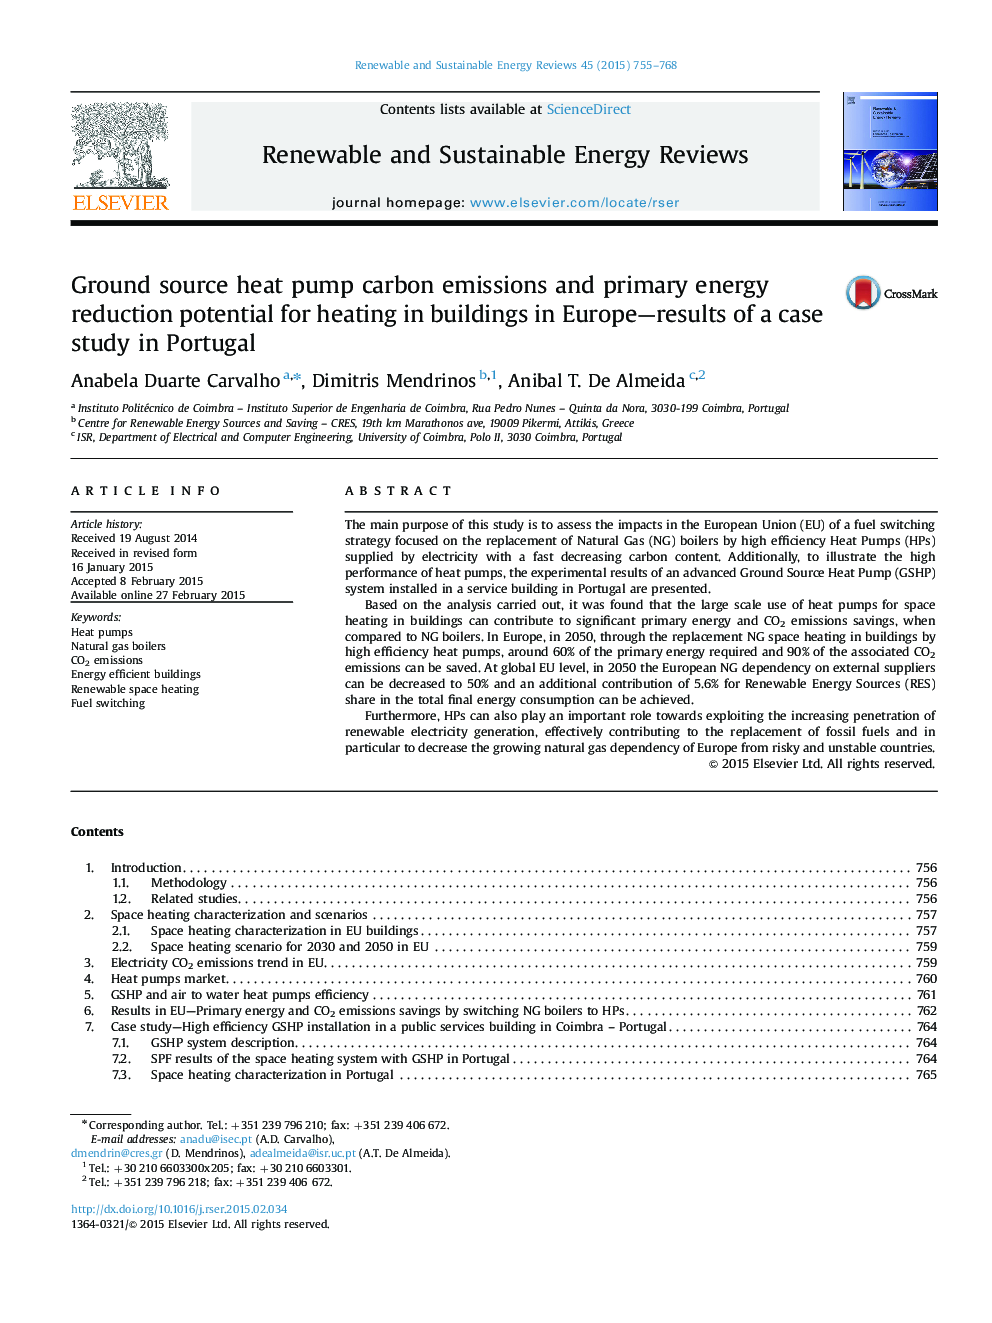 Ground source heat pump carbon emissions and primary energy reduction potential for heating in buildings in Europe—results of a case study in Portugal